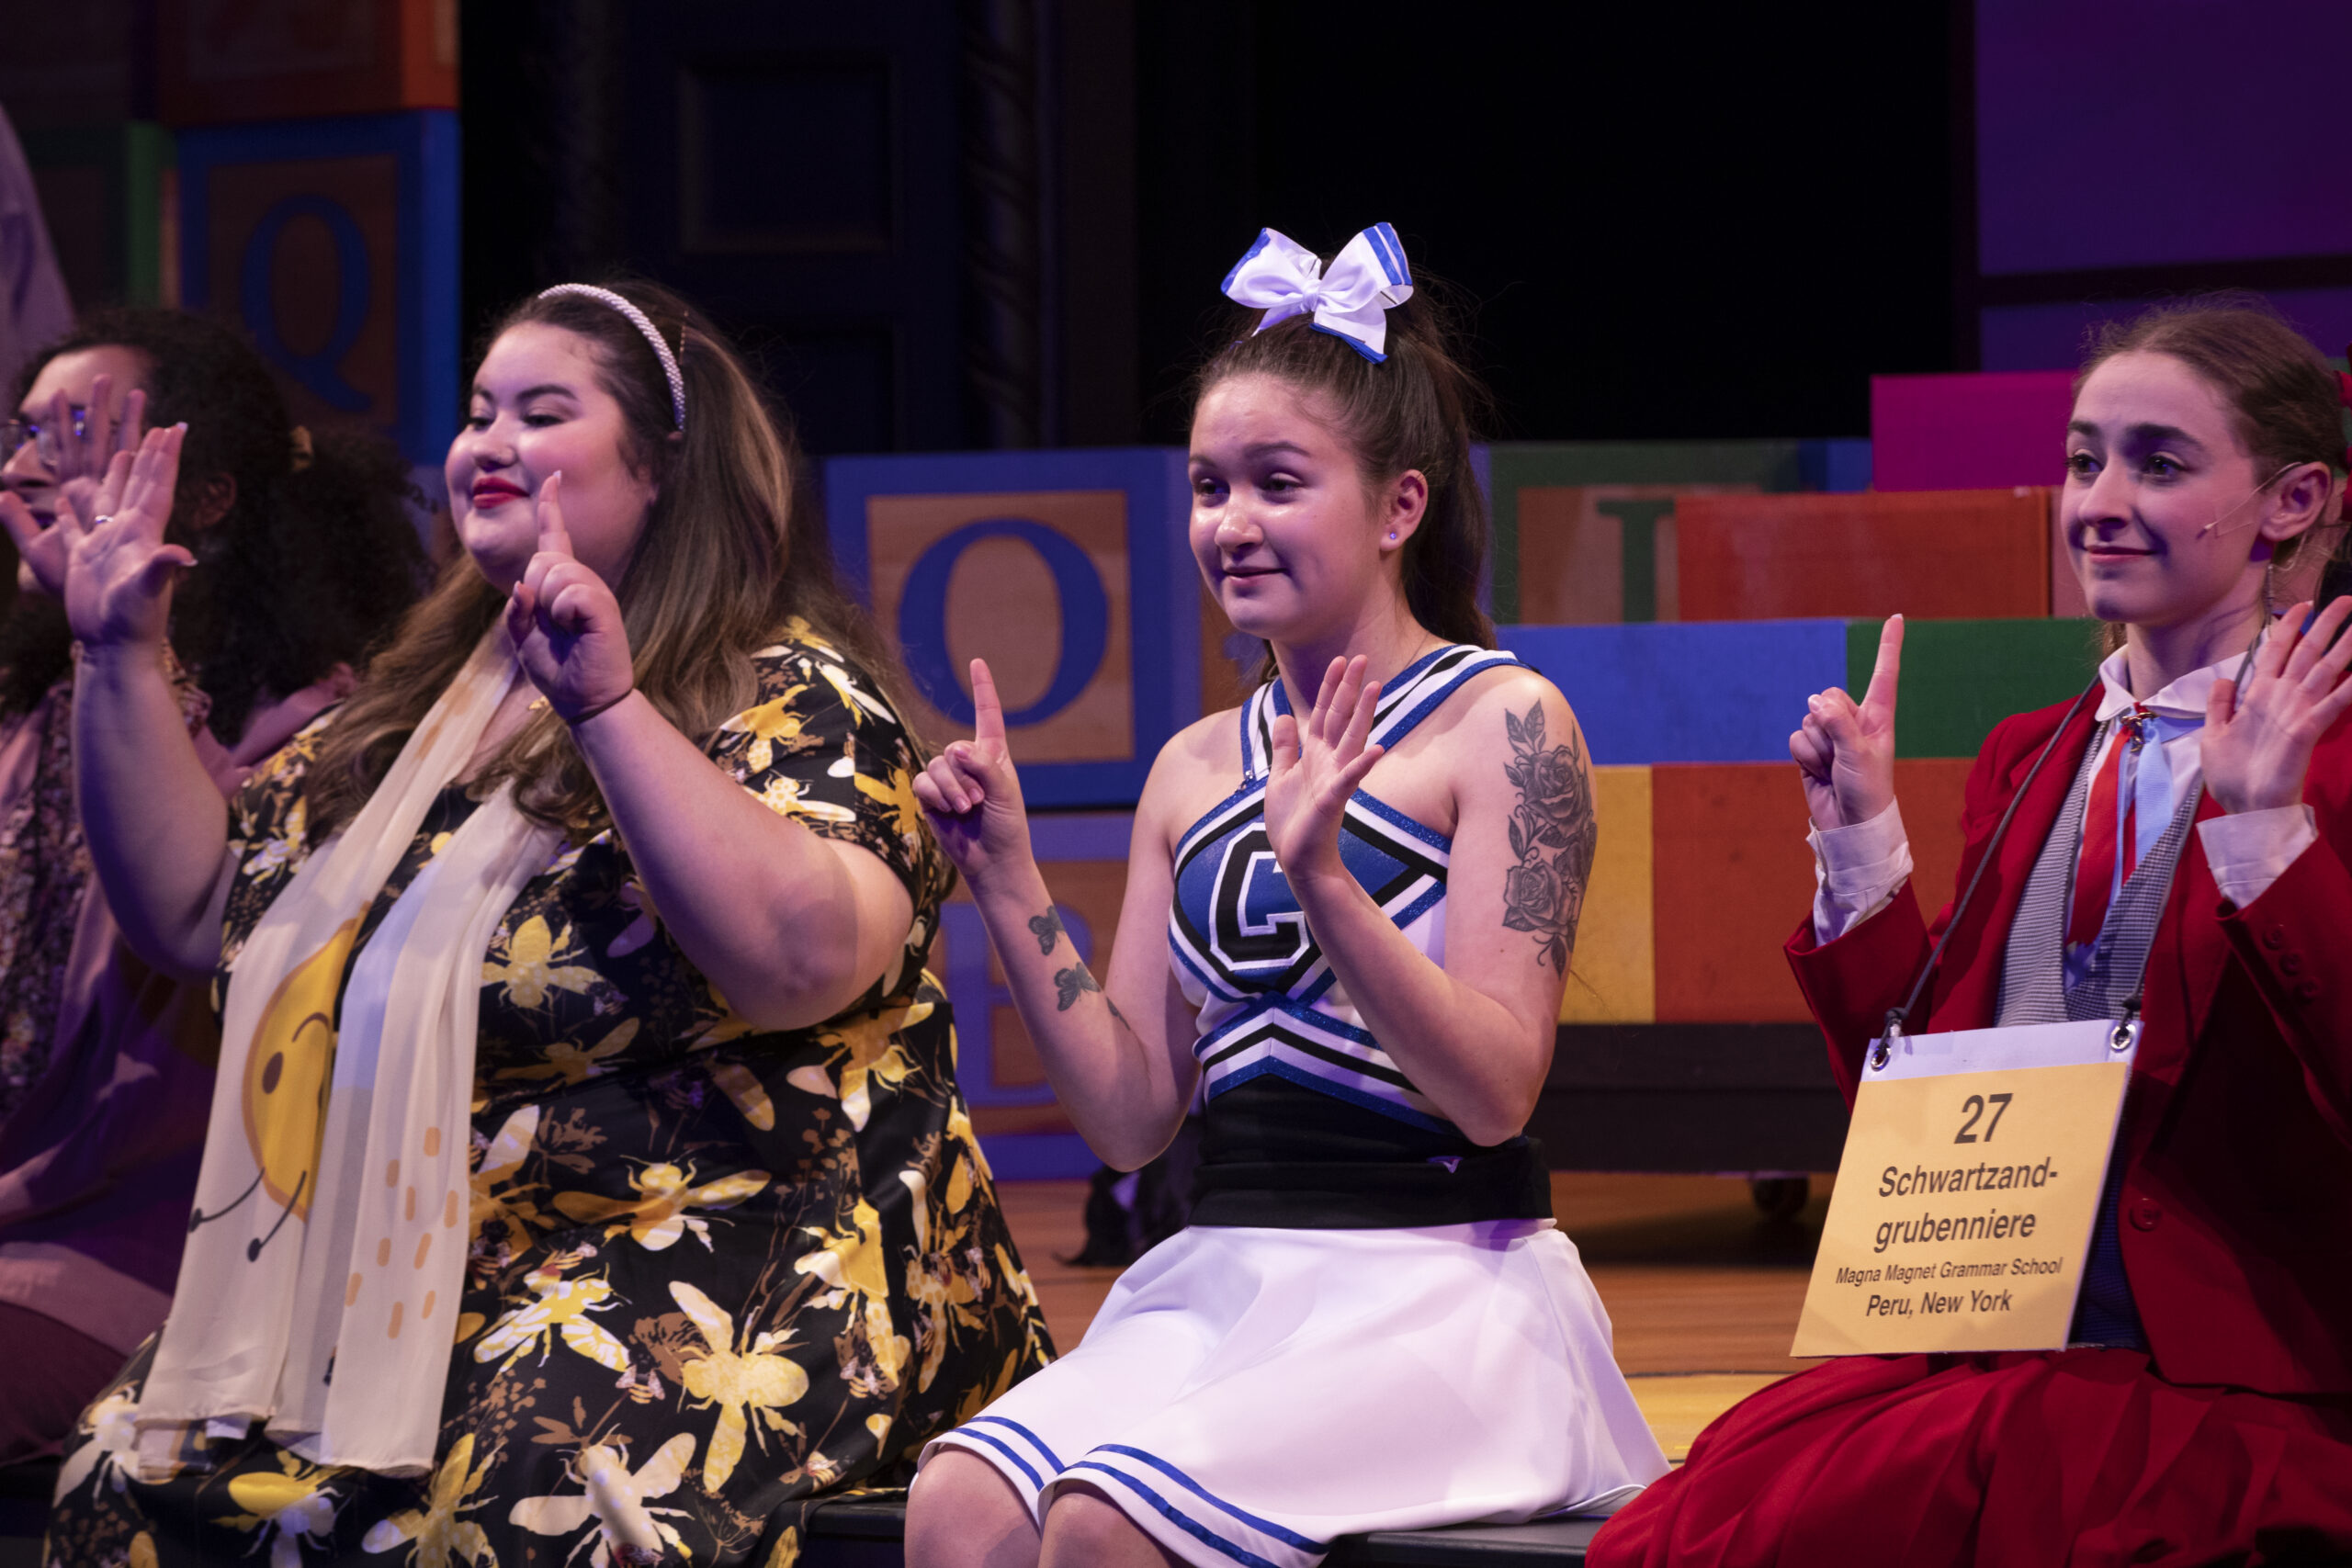 Sunday, April 30, 2023: Catch the final show of THE 25TH ANNUAL PUTNAM COUNTY SPELLING BEE musical!